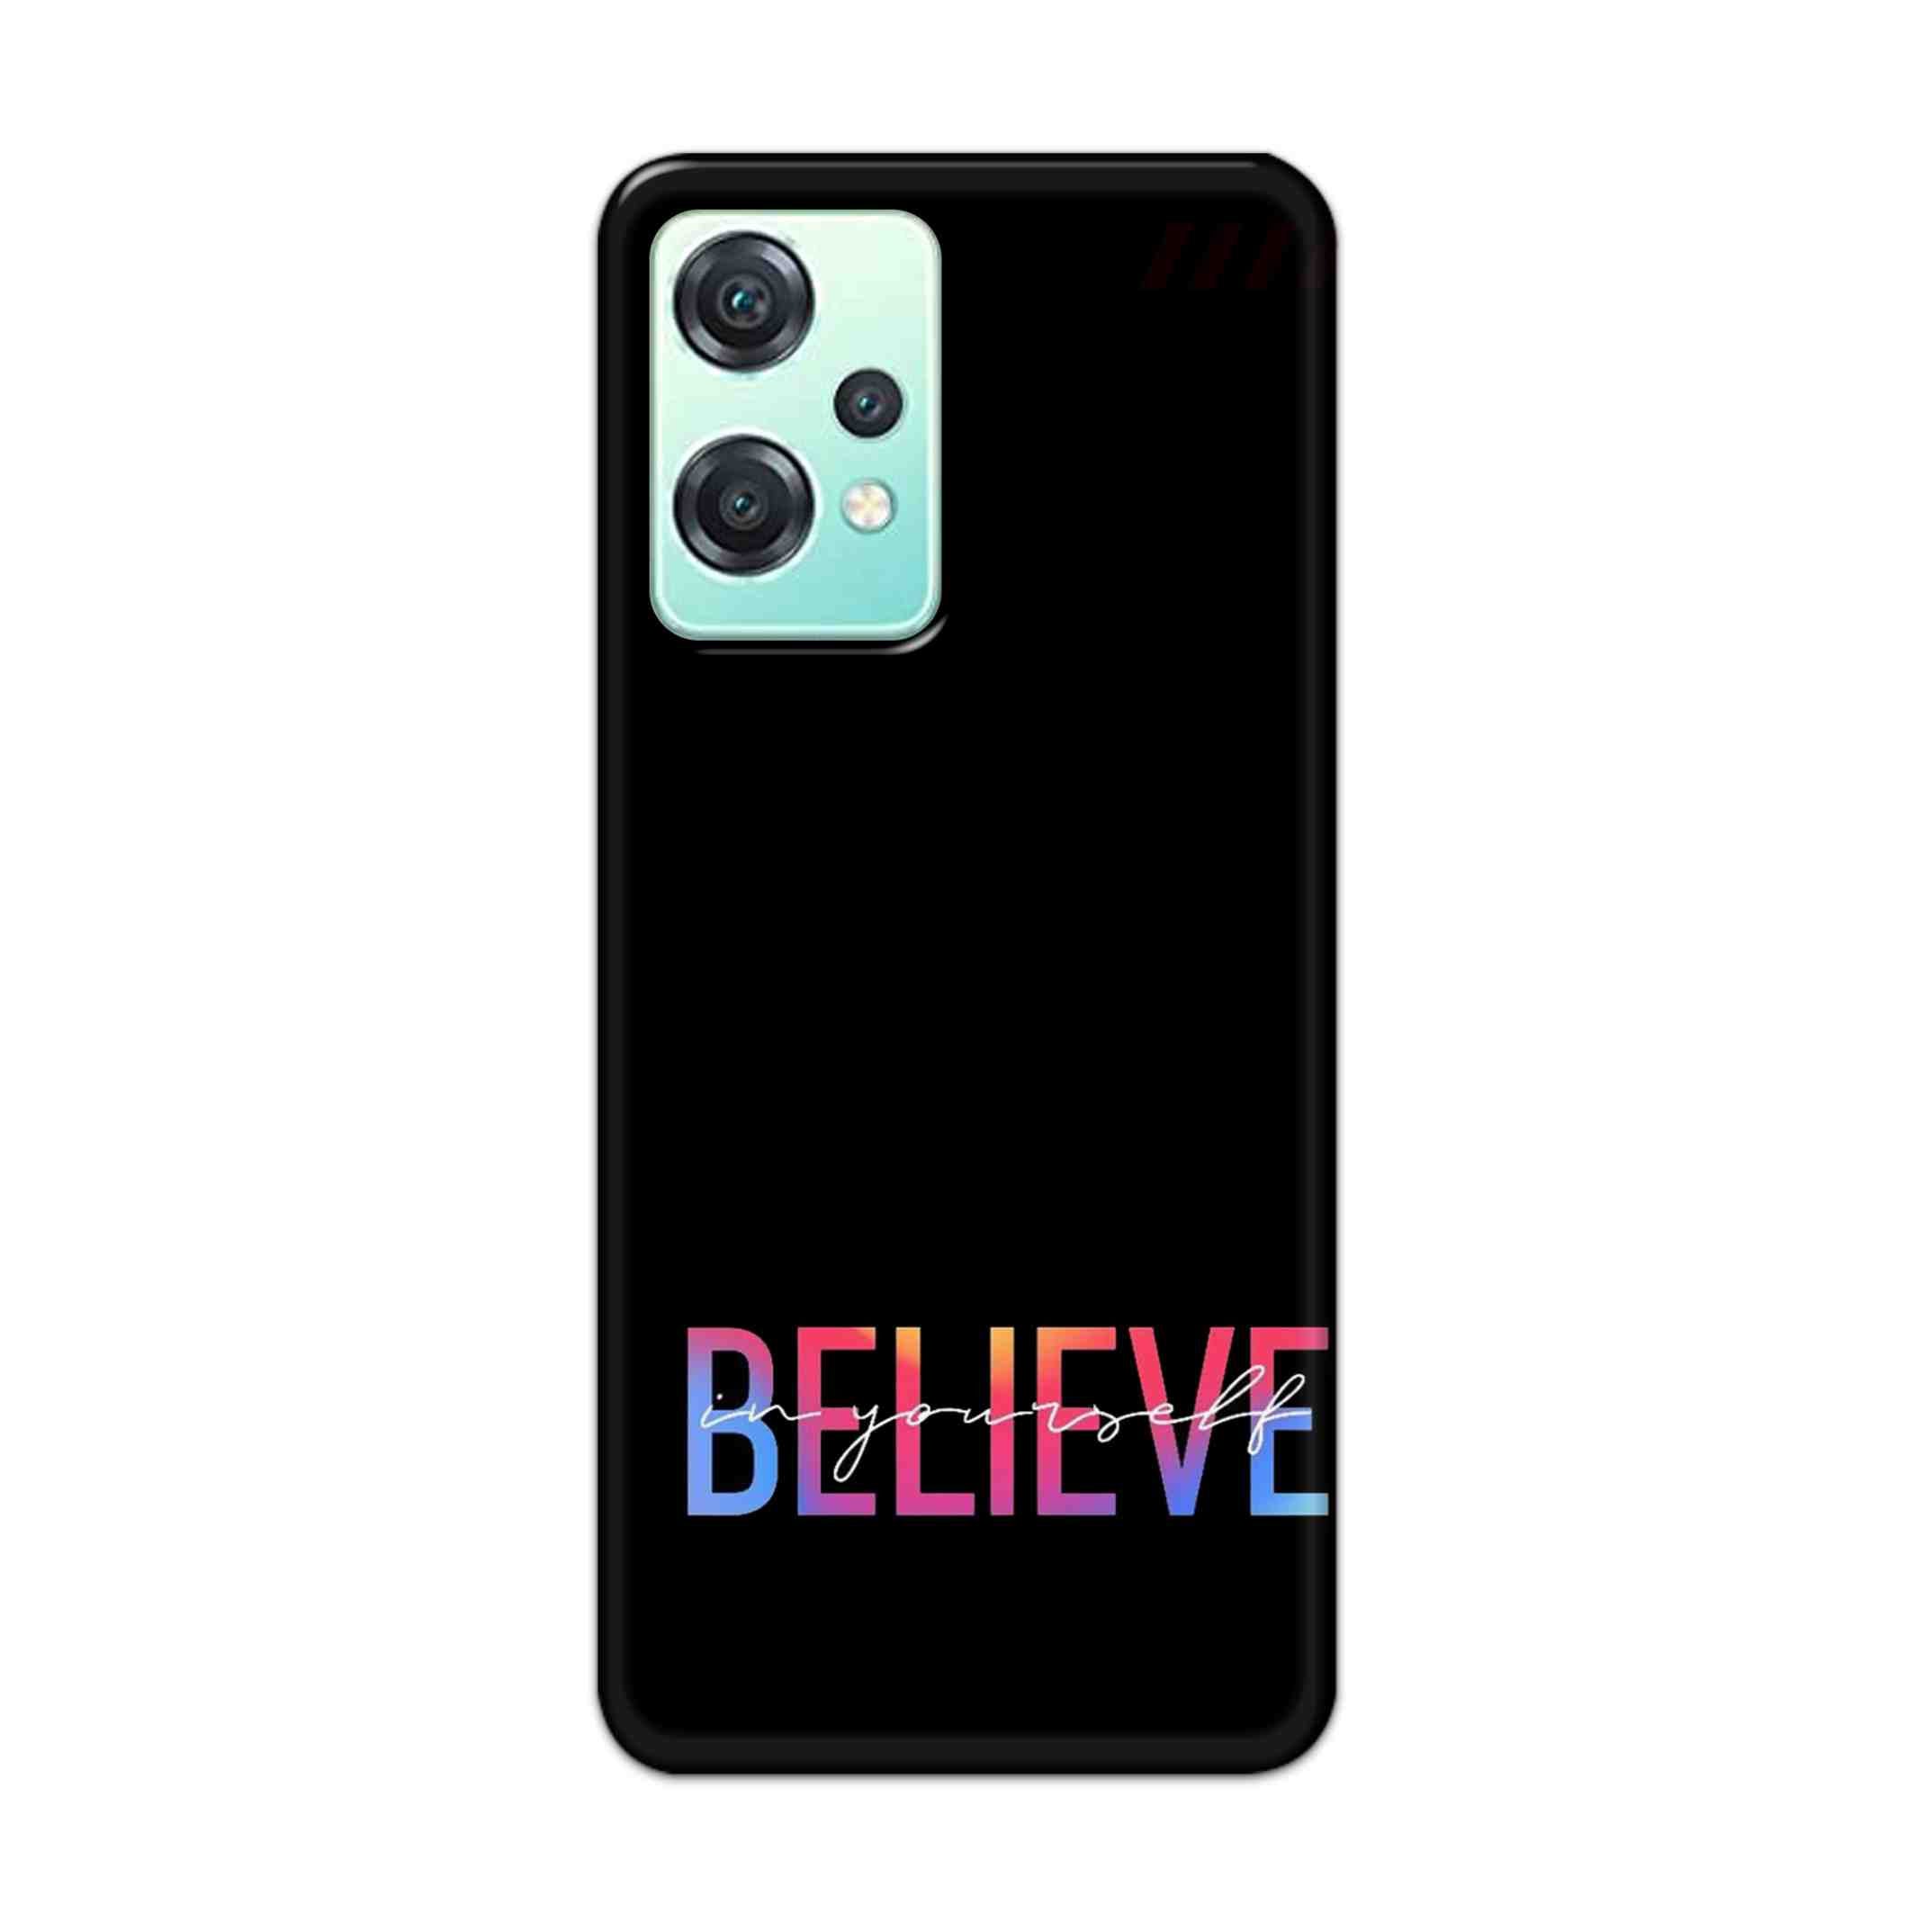 Buy Believe Hard Back Mobile Phone Case Cover For OnePlus Nord CE 2 Lite 5G Online